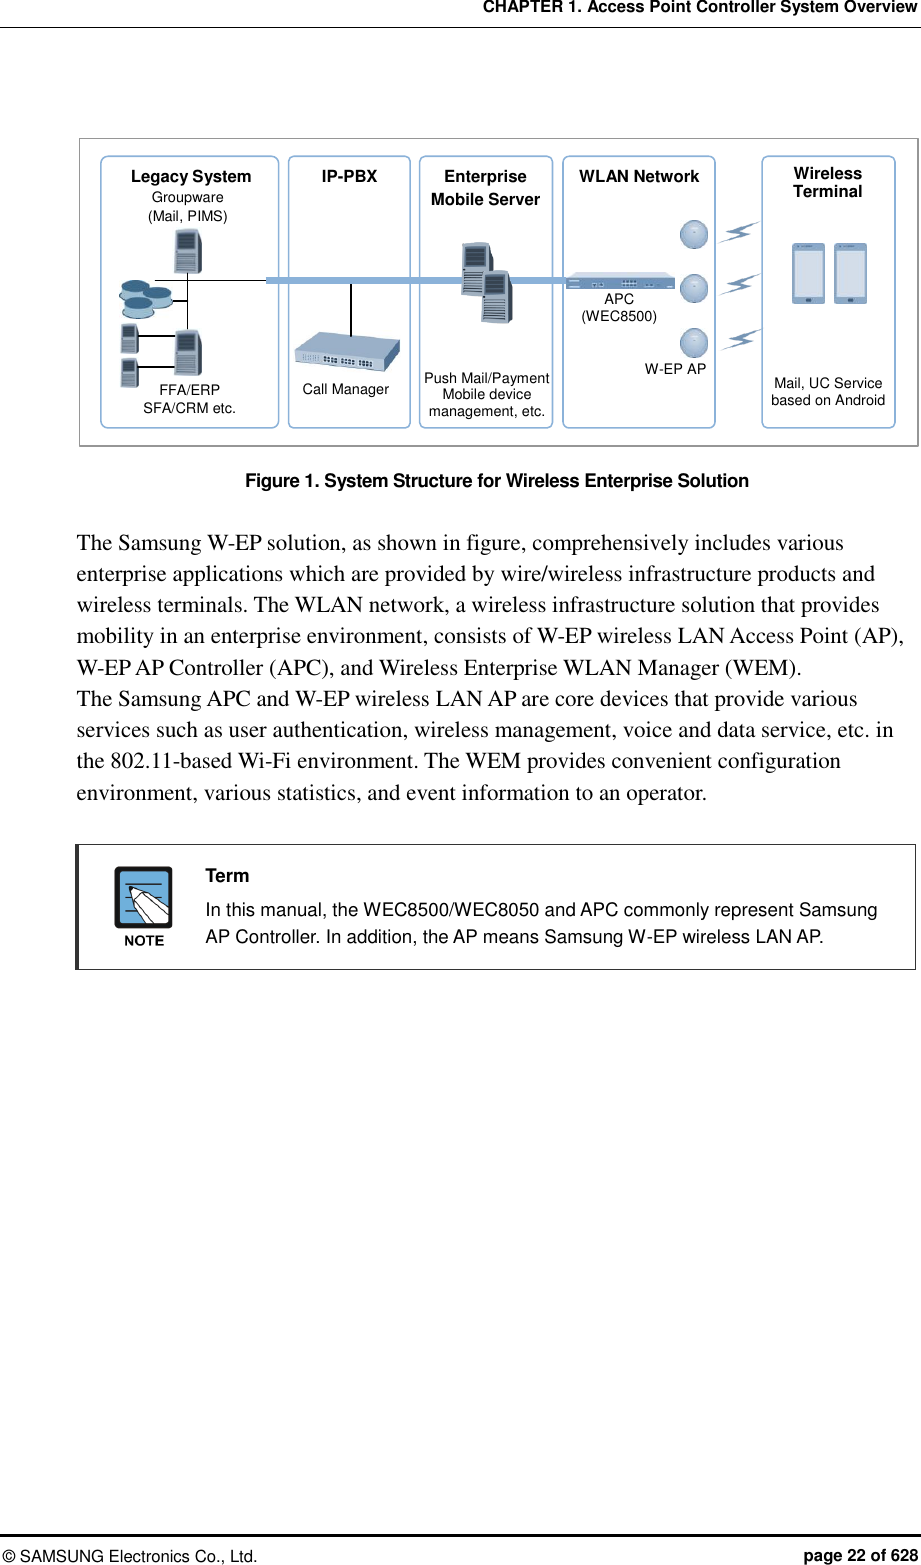 CHAPTER 1. Access Point Controller System Overview ©  SAMSUNG Electronics Co., Ltd.  page 22 of 628  Figure 1. System Structure for Wireless Enterprise Solution  The Samsung W-EP solution, as shown in figure, comprehensively includes various enterprise applications which are provided by wire/wireless infrastructure products and wireless terminals. The WLAN network, a wireless infrastructure solution that provides mobility in an enterprise environment, consists of W-EP wireless LAN Access Point (AP), W-EP AP Controller (APC), and Wireless Enterprise WLAN Manager (WEM).   The Samsung APC and W-EP wireless LAN AP are core devices that provide various services such as user authentication, wireless management, voice and data service, etc. in the 802.11-based Wi-Fi environment. The WEM provides convenient configuration environment, various statistics, and event information to an operator.    Term   In this manual, the WEC8500/WEC8050 and APC commonly represent Samsung AP Controller. In addition, the AP means Samsung W-EP wireless LAN AP.  Enterprise   Mobile Server IP-PBX Groupware (Mail, PIMS) FFA/ERP SFA/CRM etc. Call Manager Legacy System Push Mail/Payment Mobile device management, etc.   WLAN Network APC (WEC8500) Wireless Terminal Mail, UC Service based on Android W-EP AP 